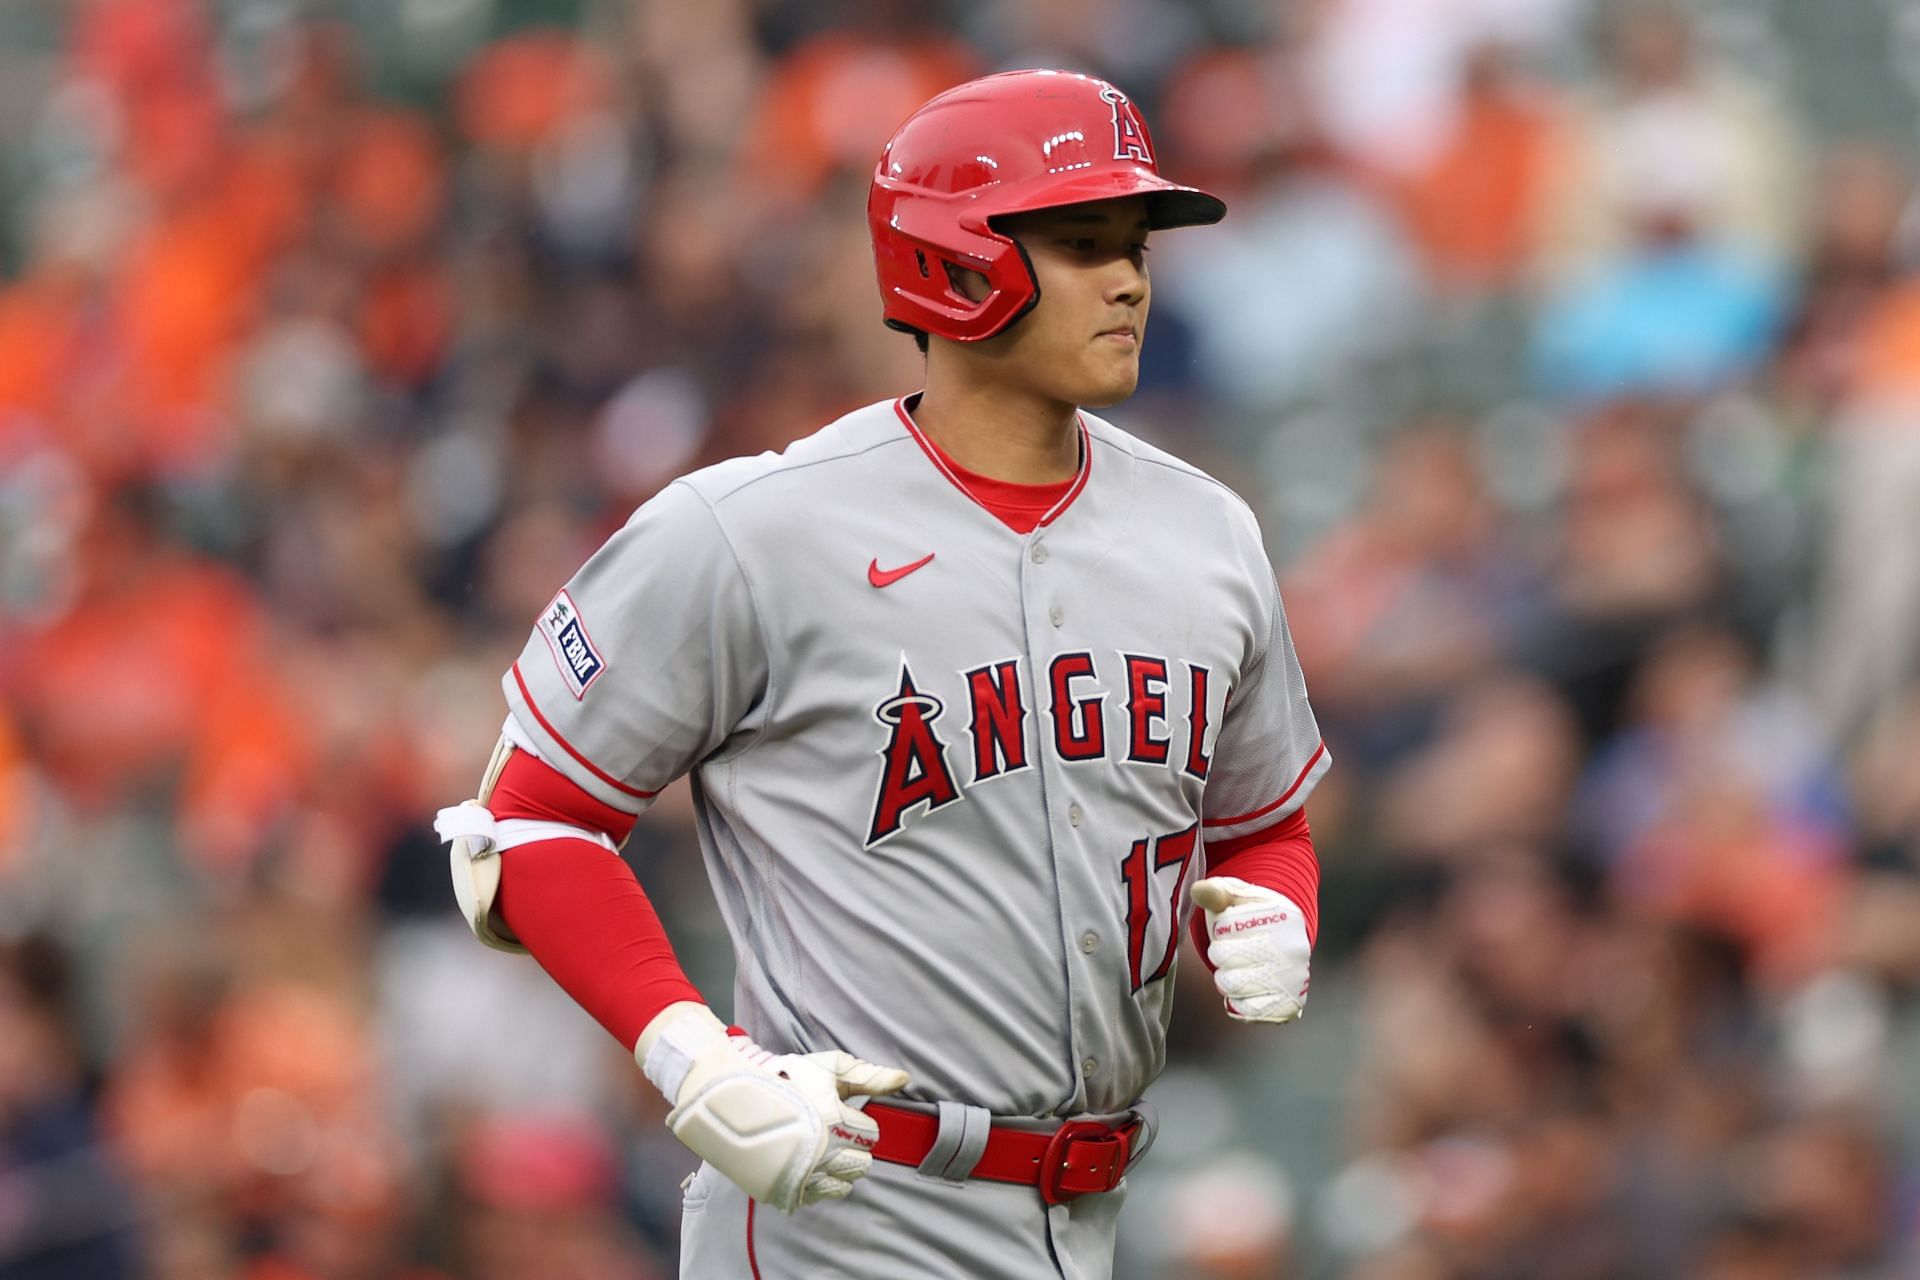 Shohei Ohtani of the Los Angeles Angels reacts after batting against the Baltimore Orioles at Oriole Park at Camden Yards